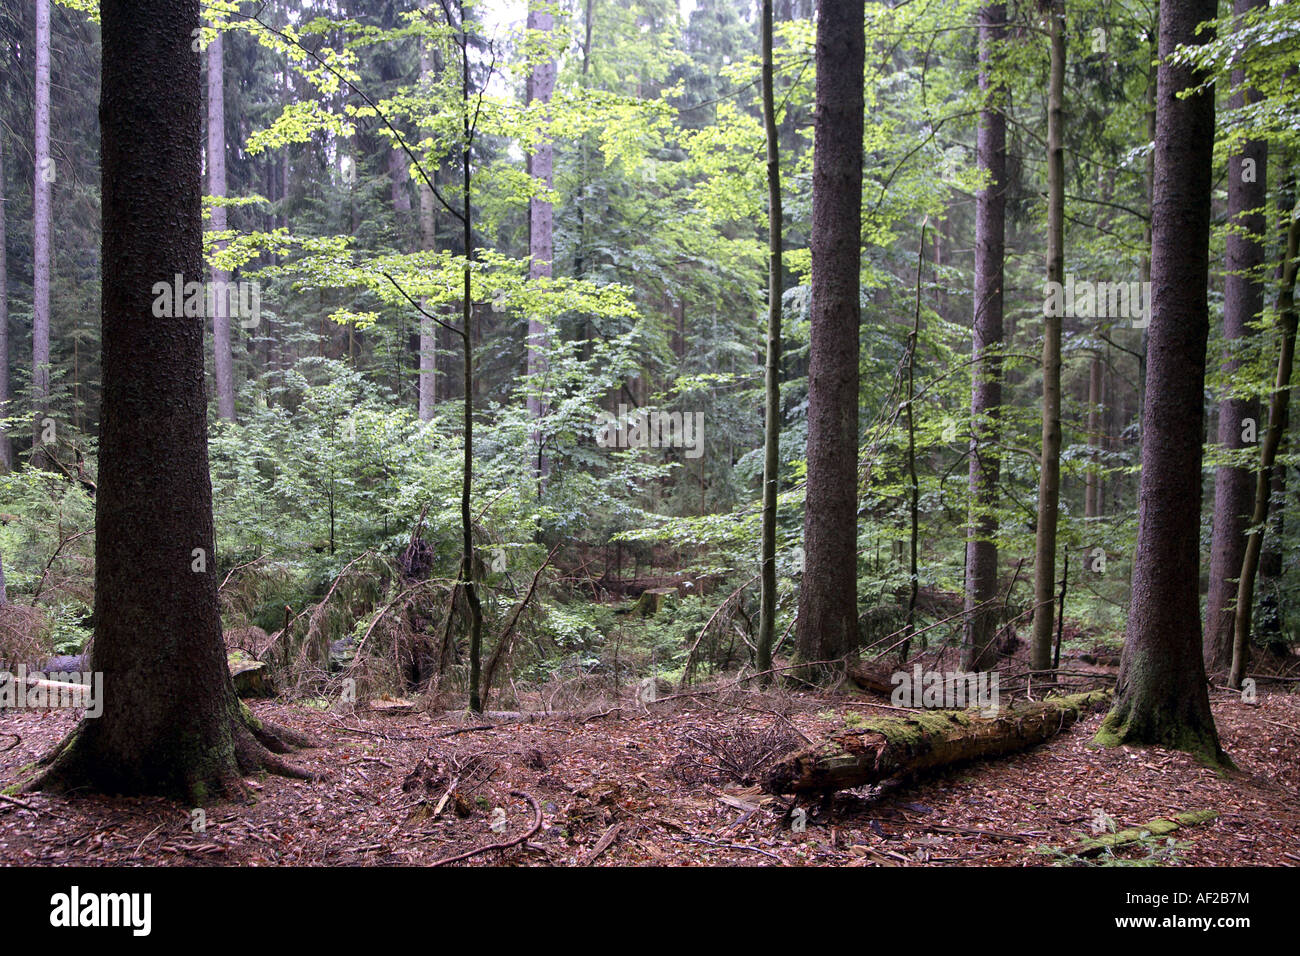 forest in the national park Bayerischer Wald, Germany, Bavaria, NP Bavarian Forest Stock Photo